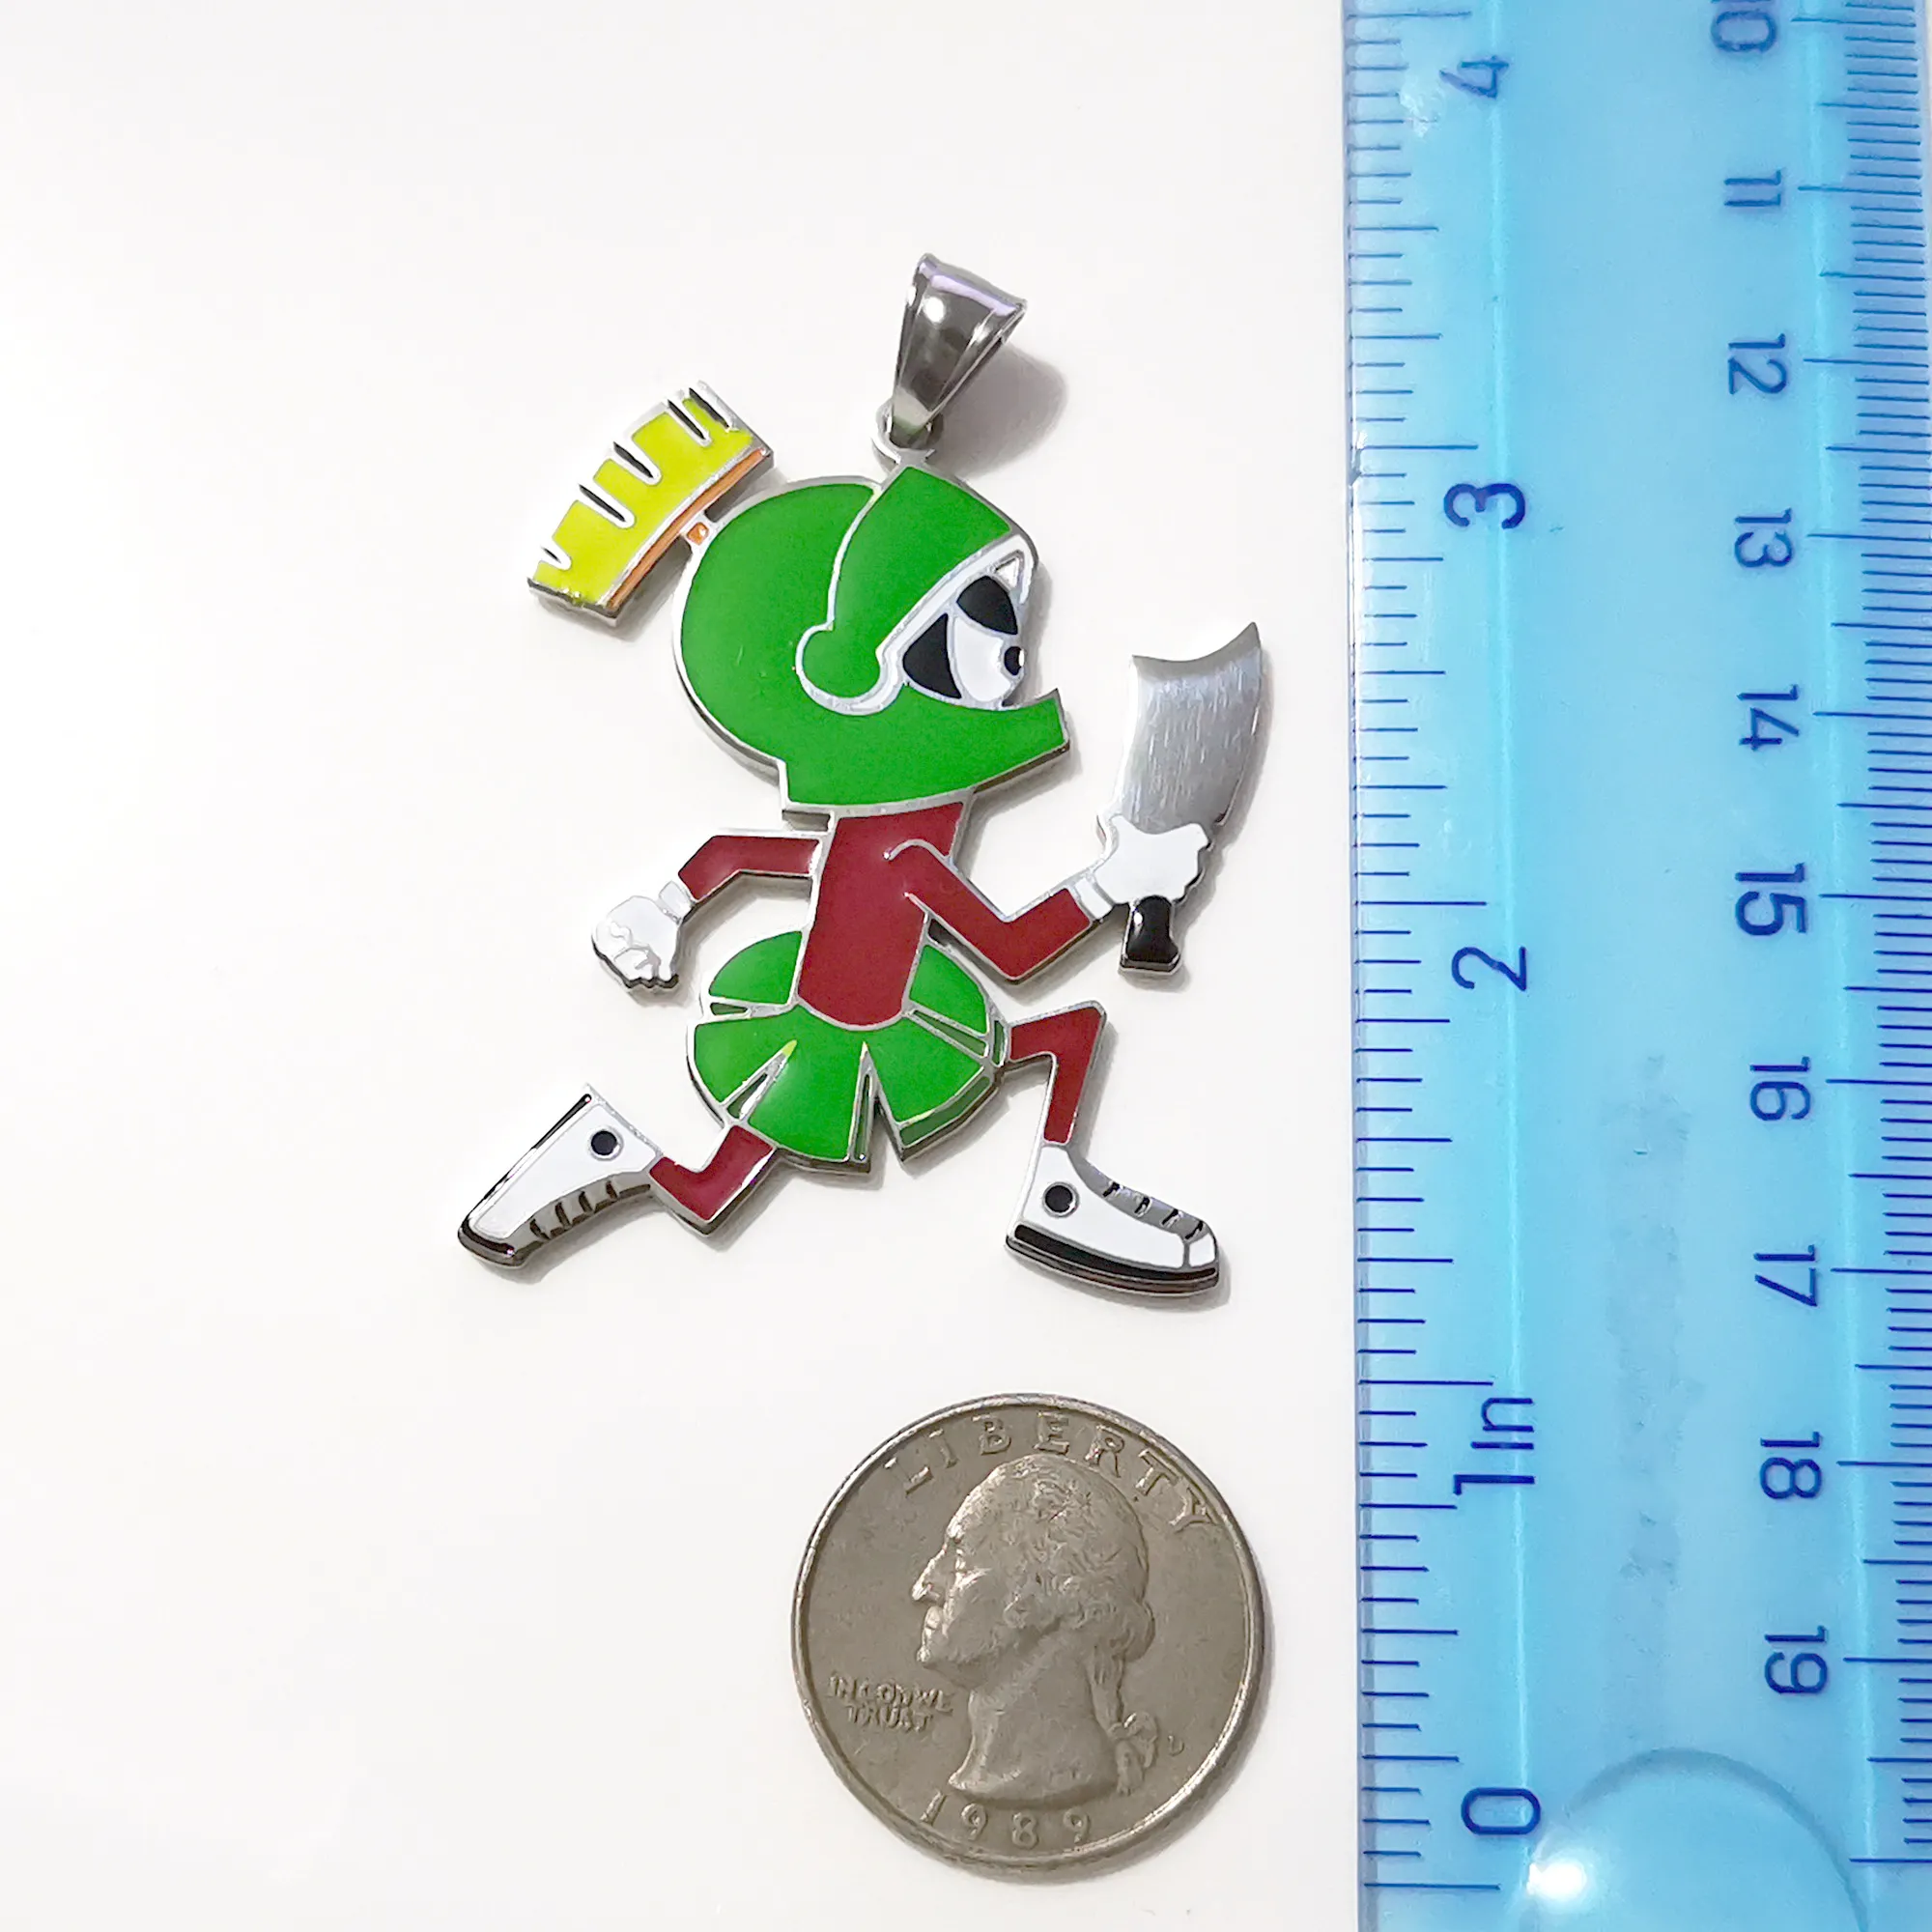 XMAS Gifts Mens Pendant Green Color 2 inch Juggalo Marvin the Martian Stainless steel ICP Hatchetman Necklace Chain252w